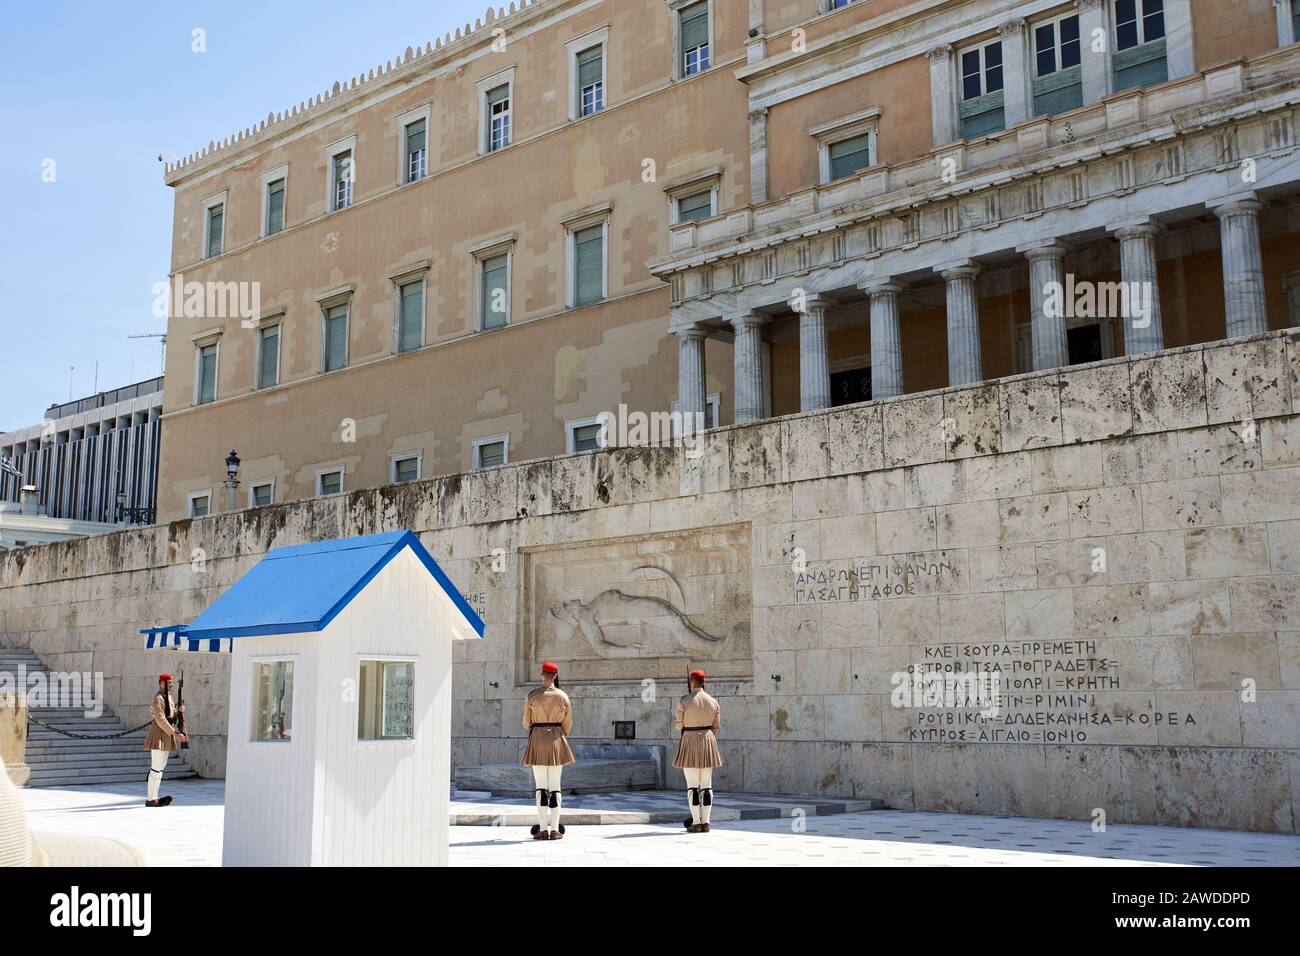 ATHENS, GREECE - MAY 18, 2019: Guardsmen with guns near parliament in Athens, Greece Stock Photo